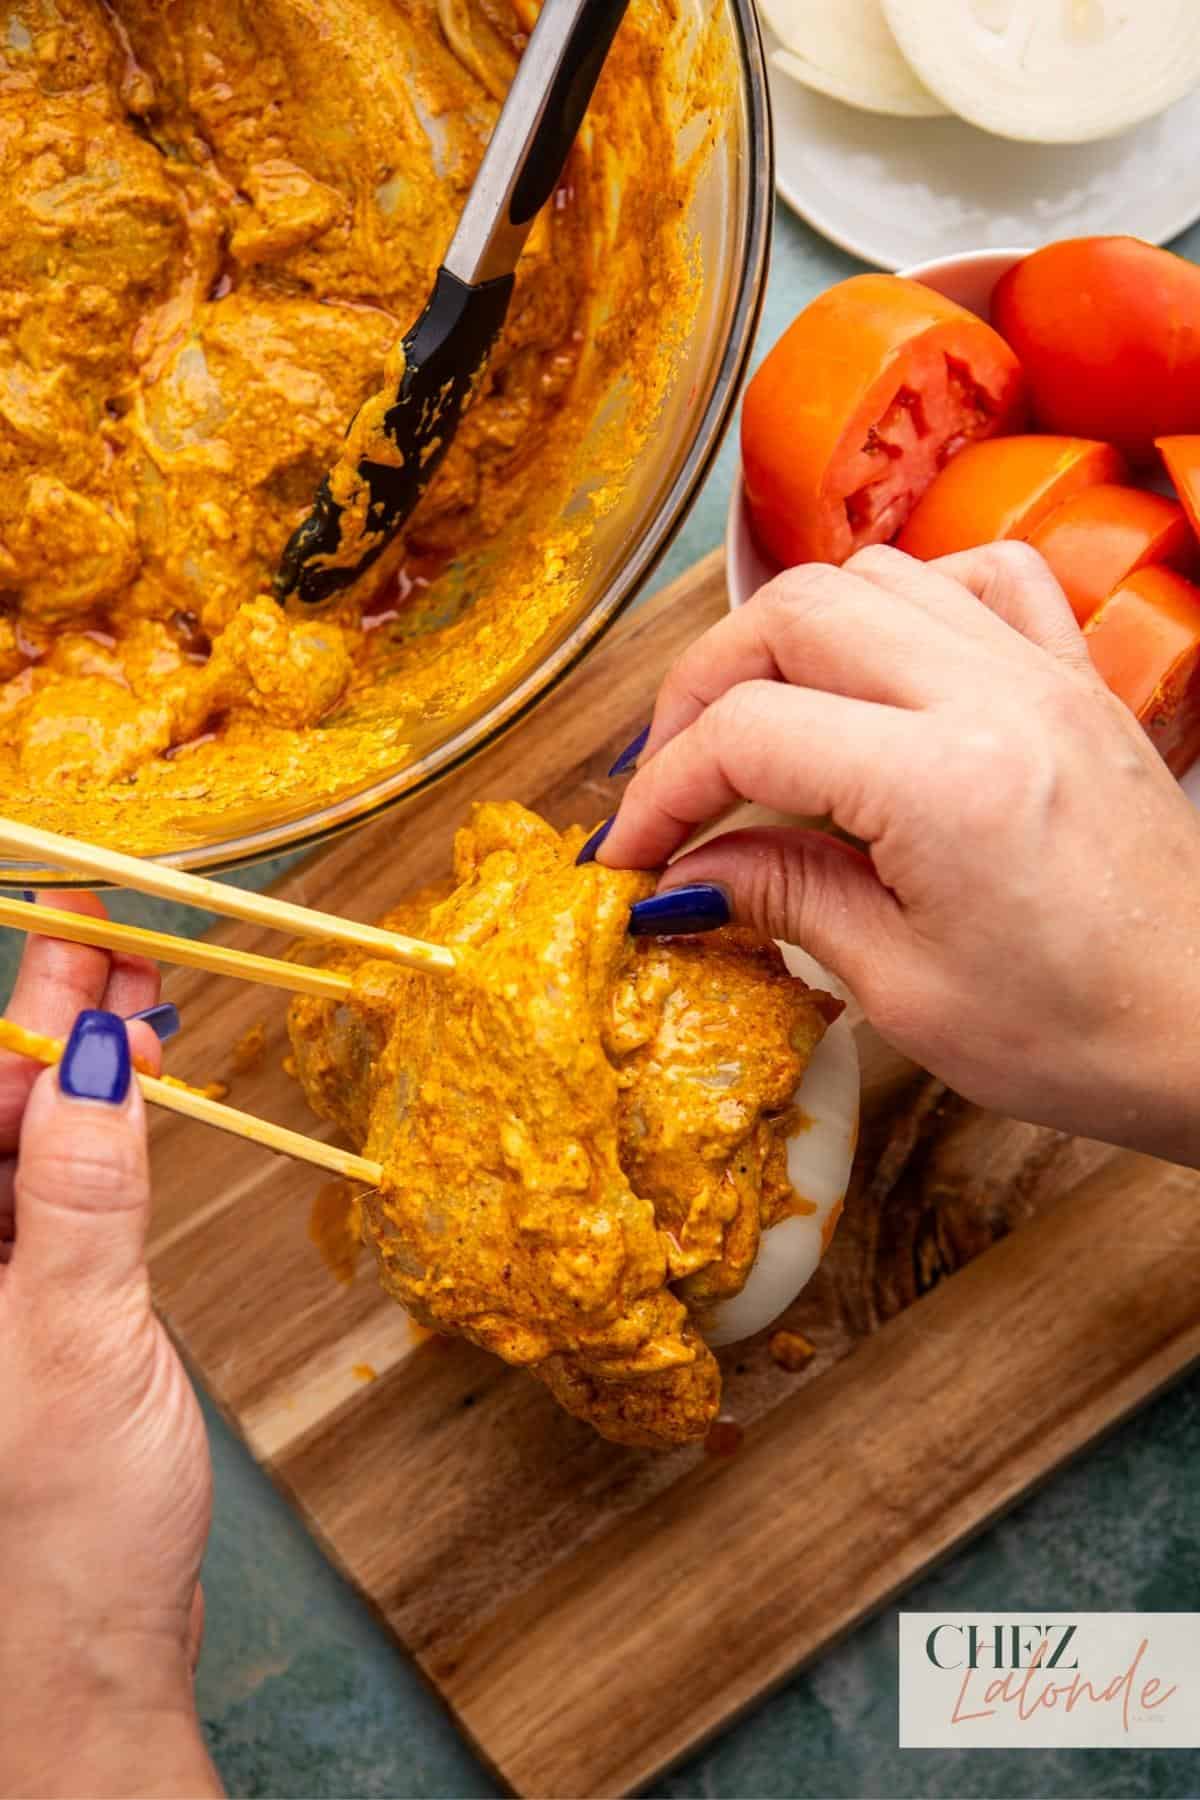 Thread the marinated chicken thighs onto the skewers, stacking 2 to 3 chicken thighs for each layer. Repeat the process, adding another thick slice of onion and some tomatoes, followed by another layer of chicken thighs.